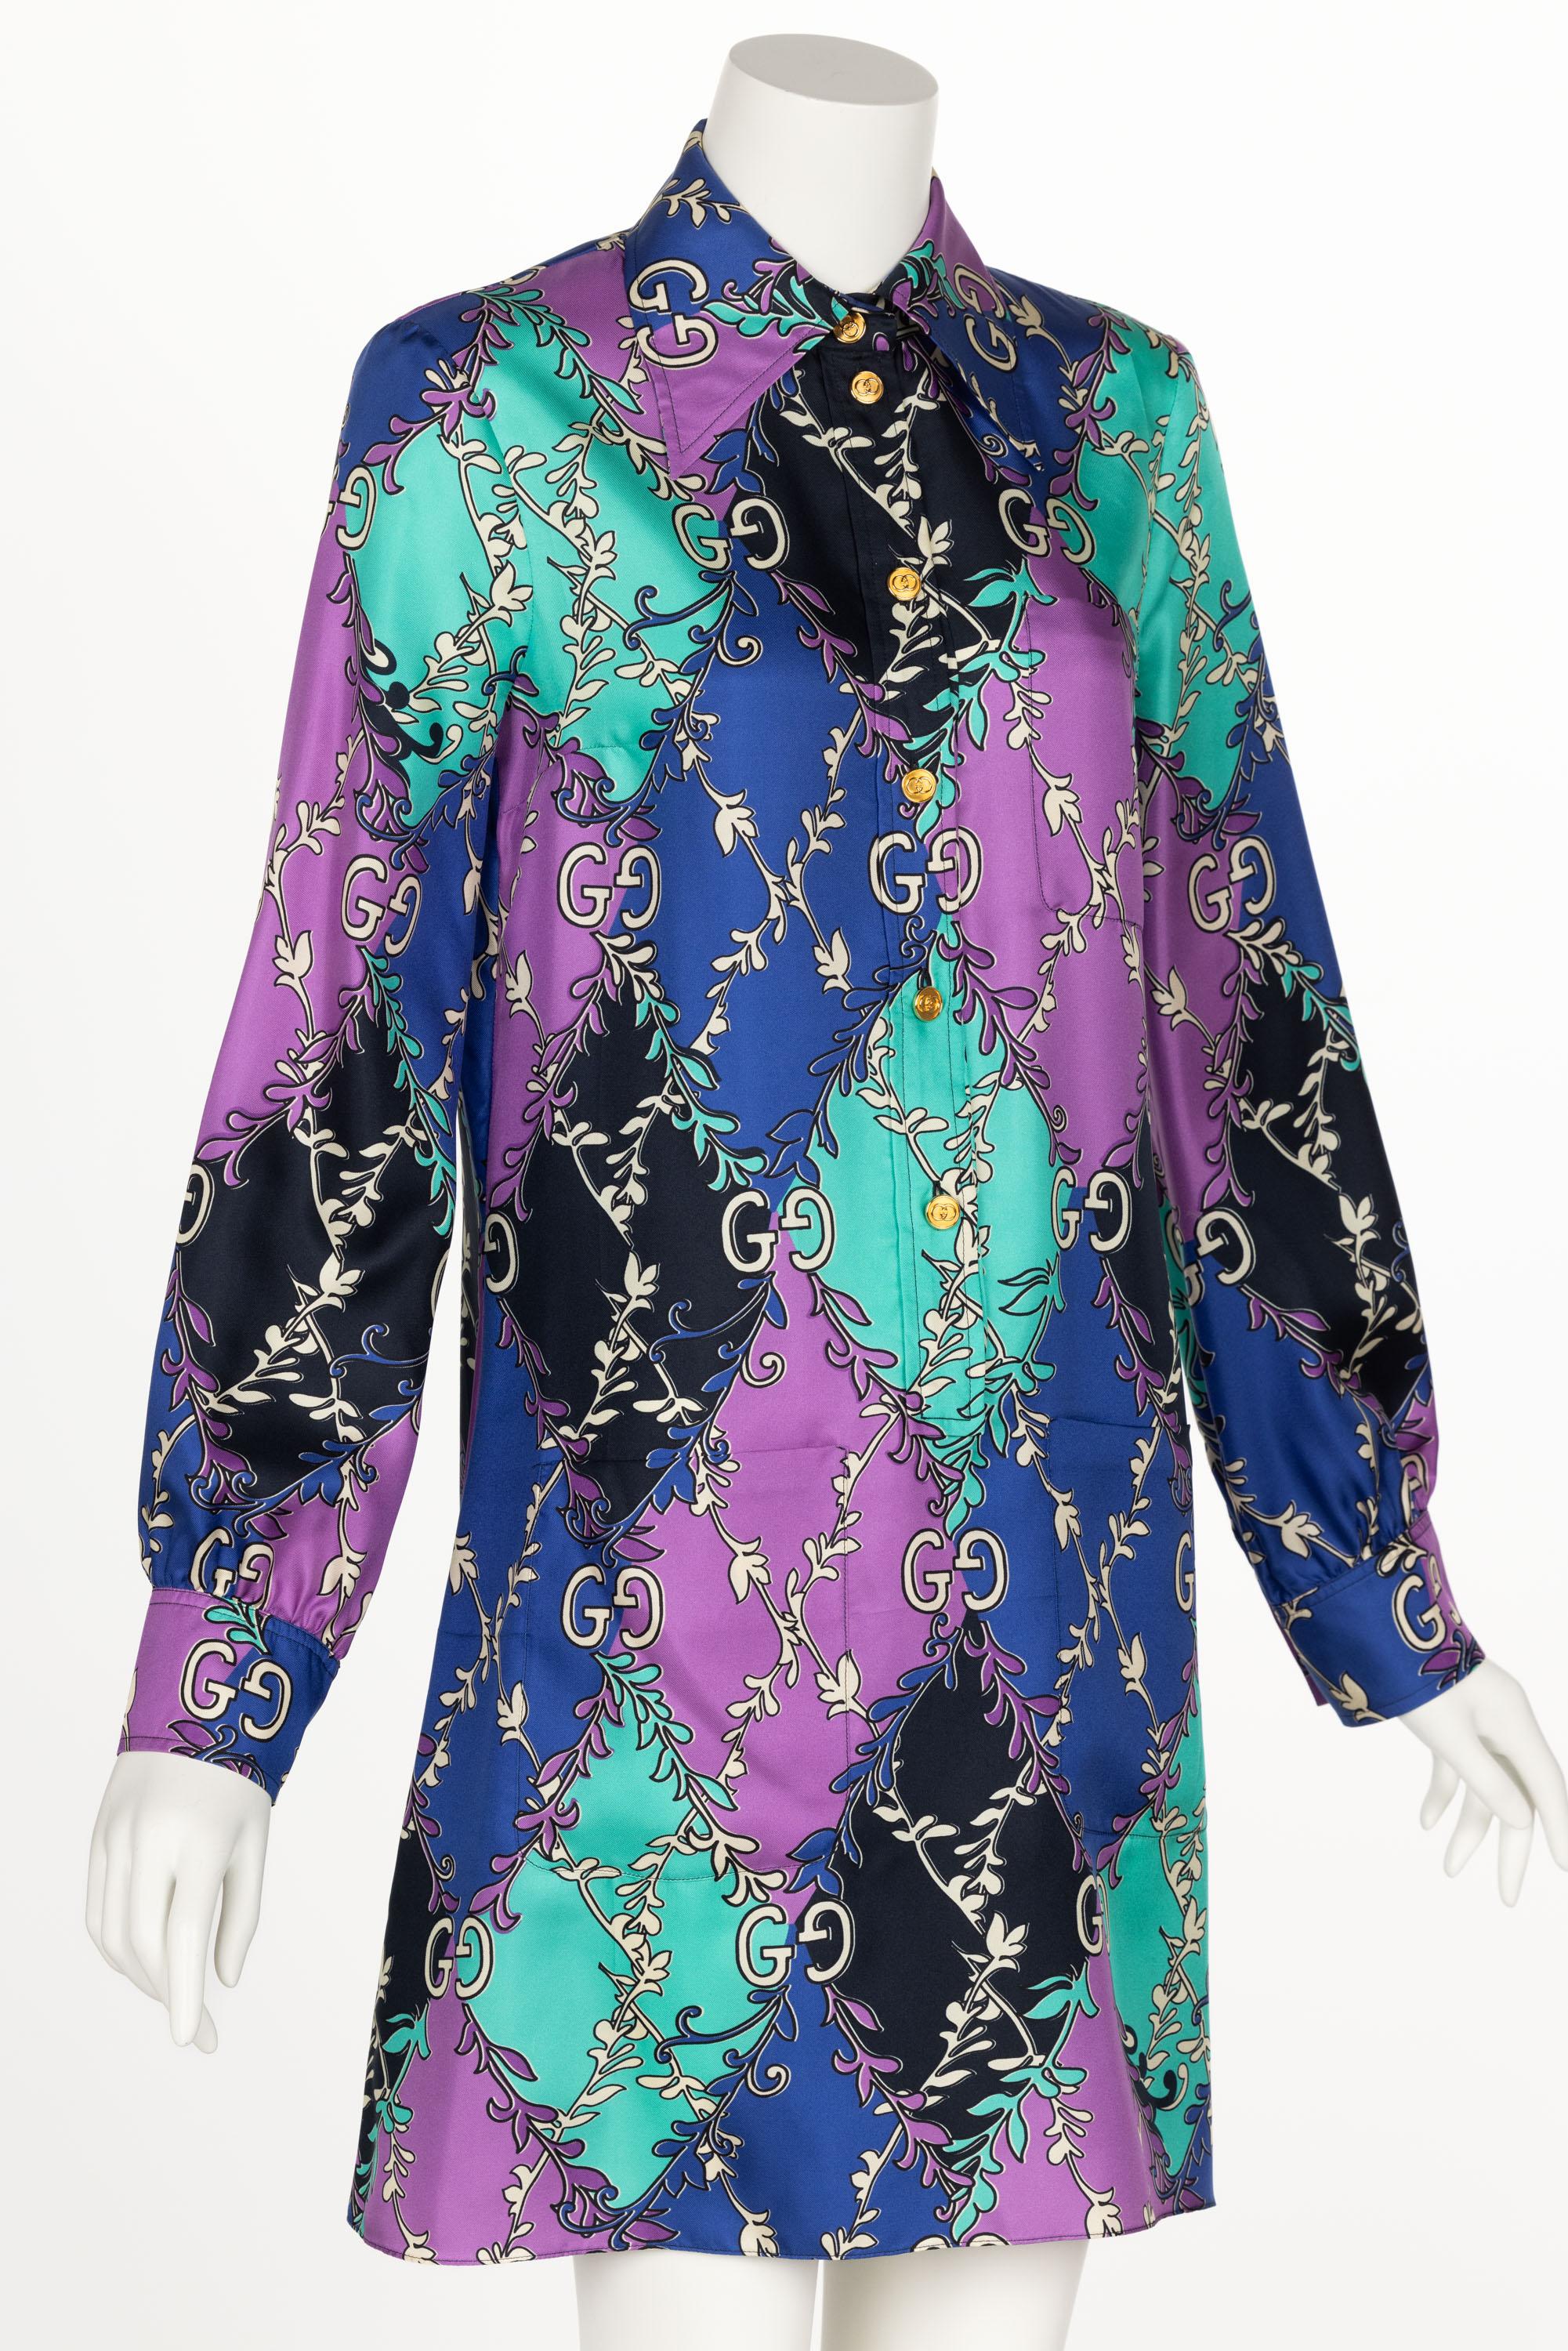 Gucci GG Rhombus Print Long Sleeve Silk Purple Print Shirtdress Resort 2020 In Excellent Condition For Sale In Boca Raton, FL